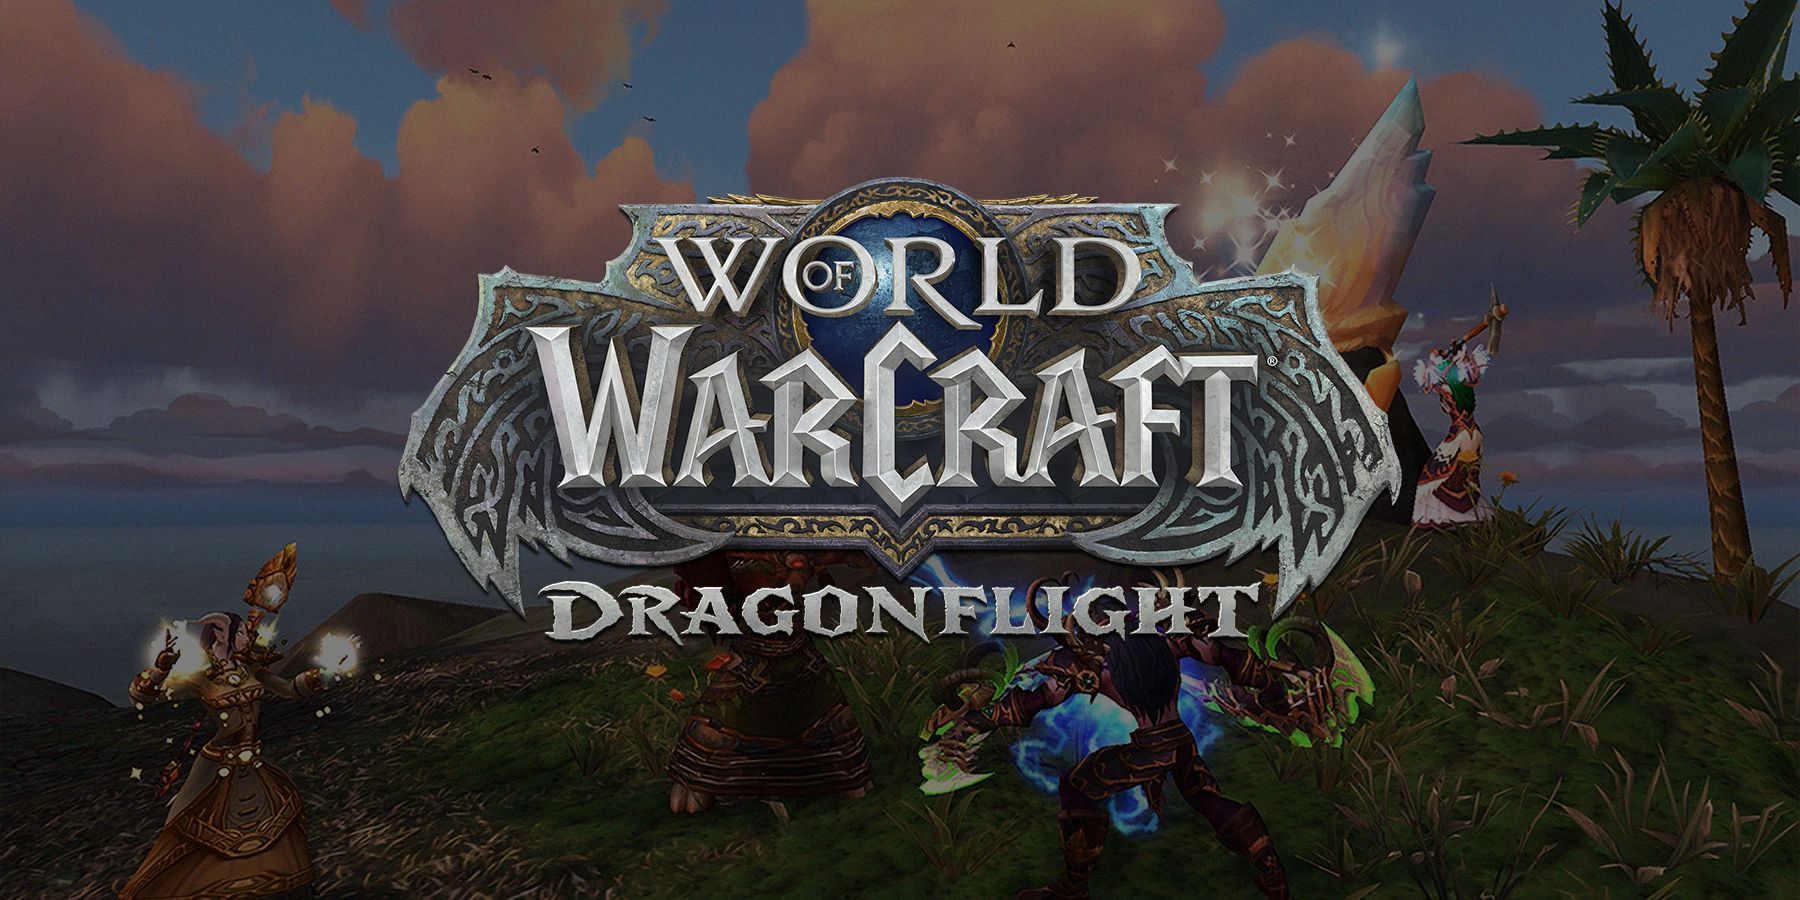 dragonflight wow pvp gear upgrade removed featured world of warcraft